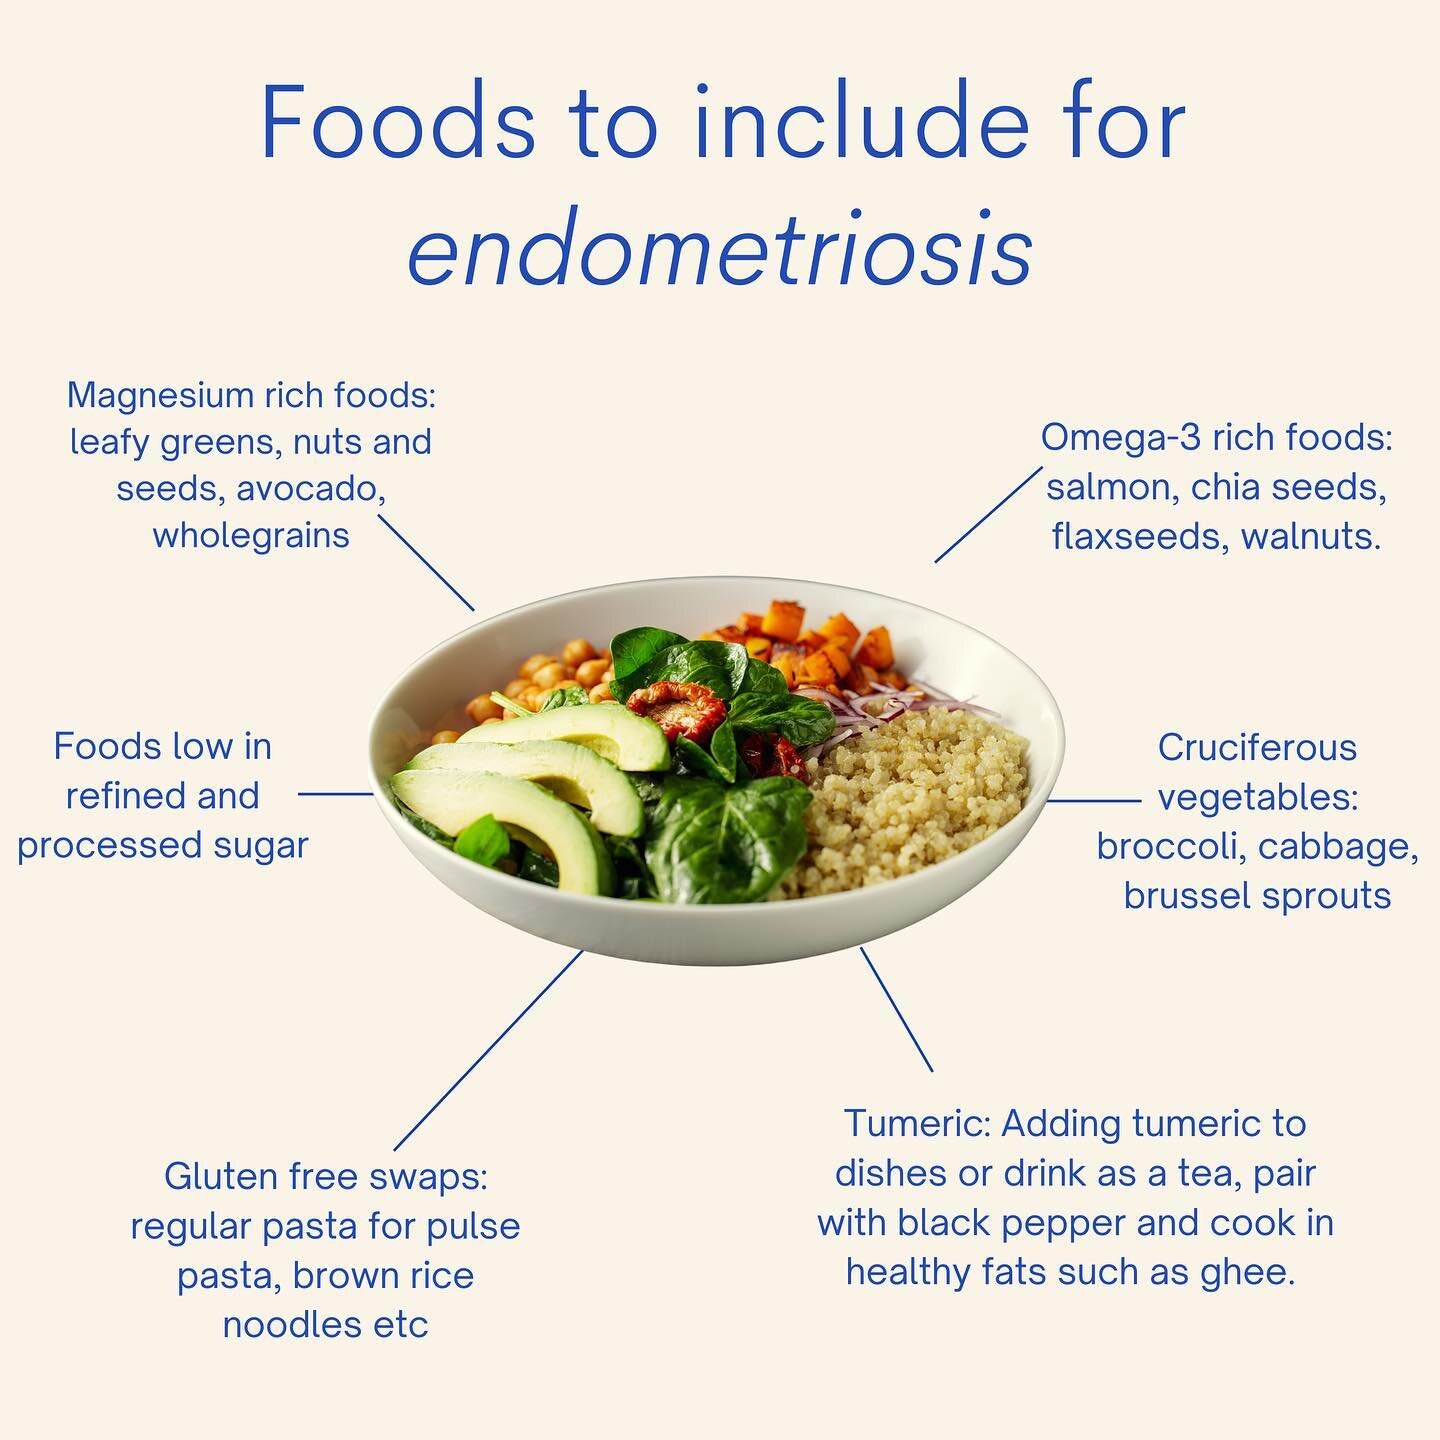 When it comes to managing endometriosis a whole food diet focused on anti-inflammatory and micronutrient rich foods is just one part of the treatment picture. Here are some foods you might like to include if you&rsquo;re suffering with endometriosis 